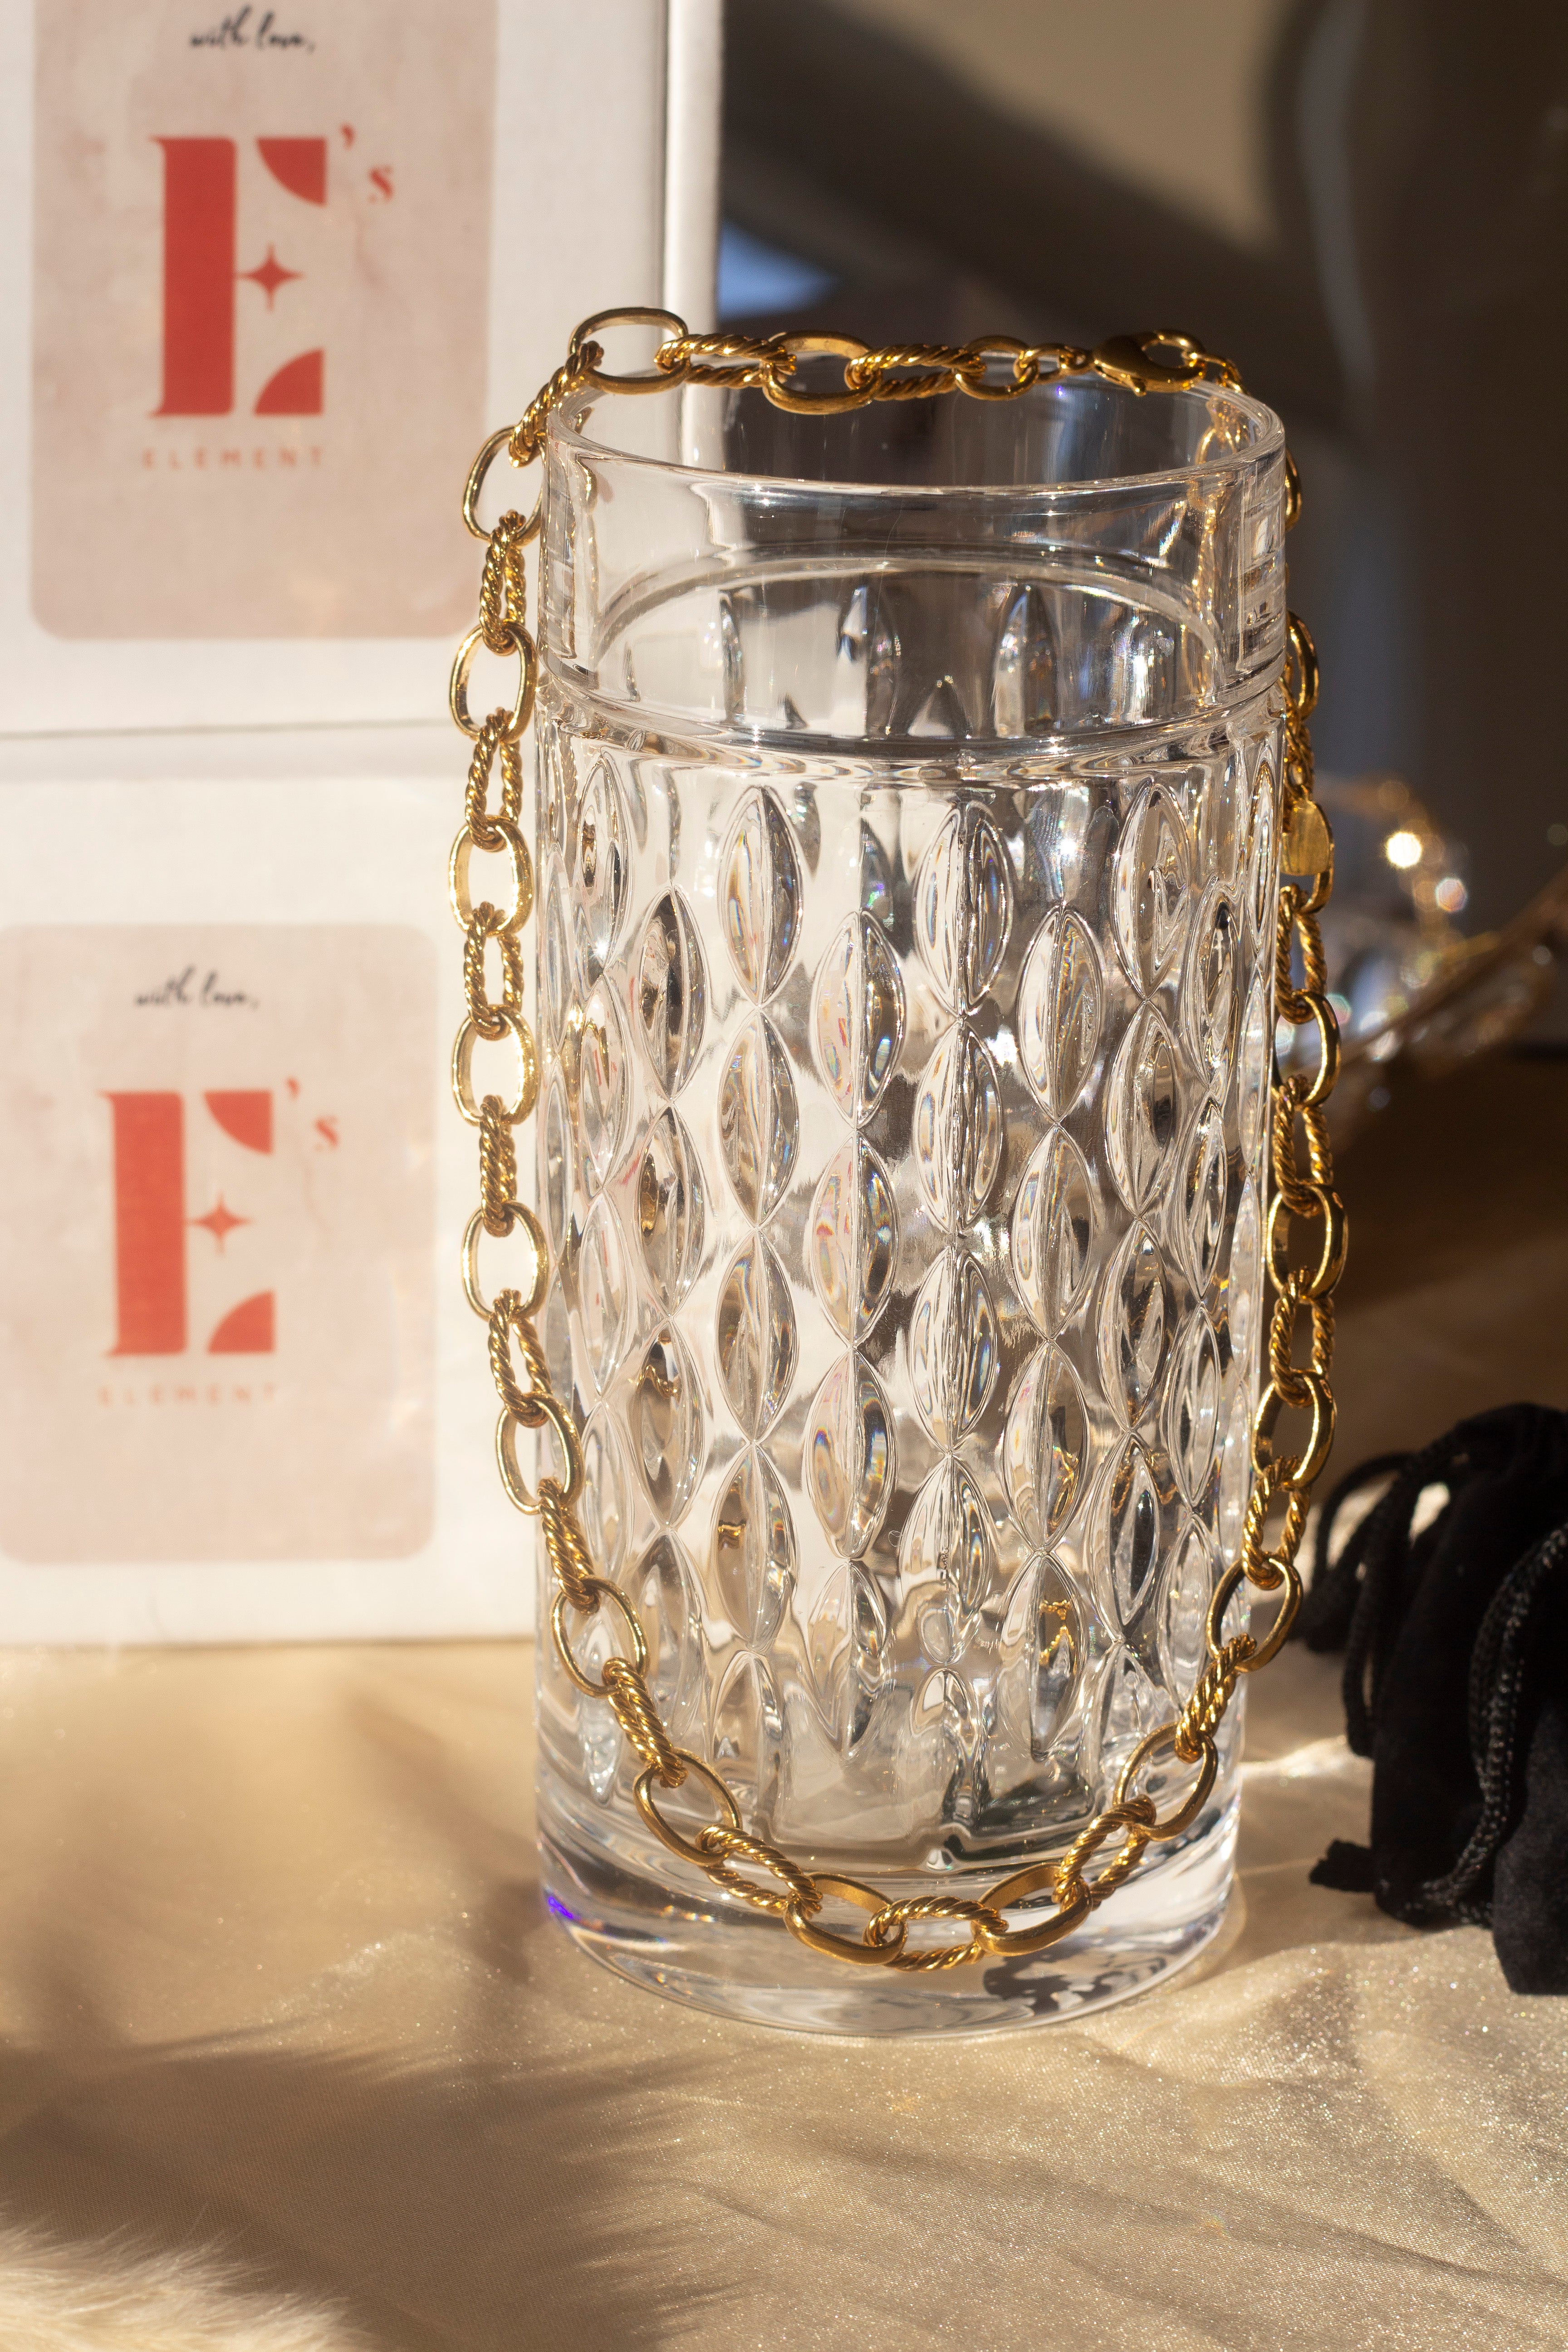 18k gold chain necklace with a rope pattern. The necklace is hanging on the edge of a glass cup. Behind the cup are two white boxes stacked on each other with the E's Element logo in red. Rope Link Signature Chain by E's Element.